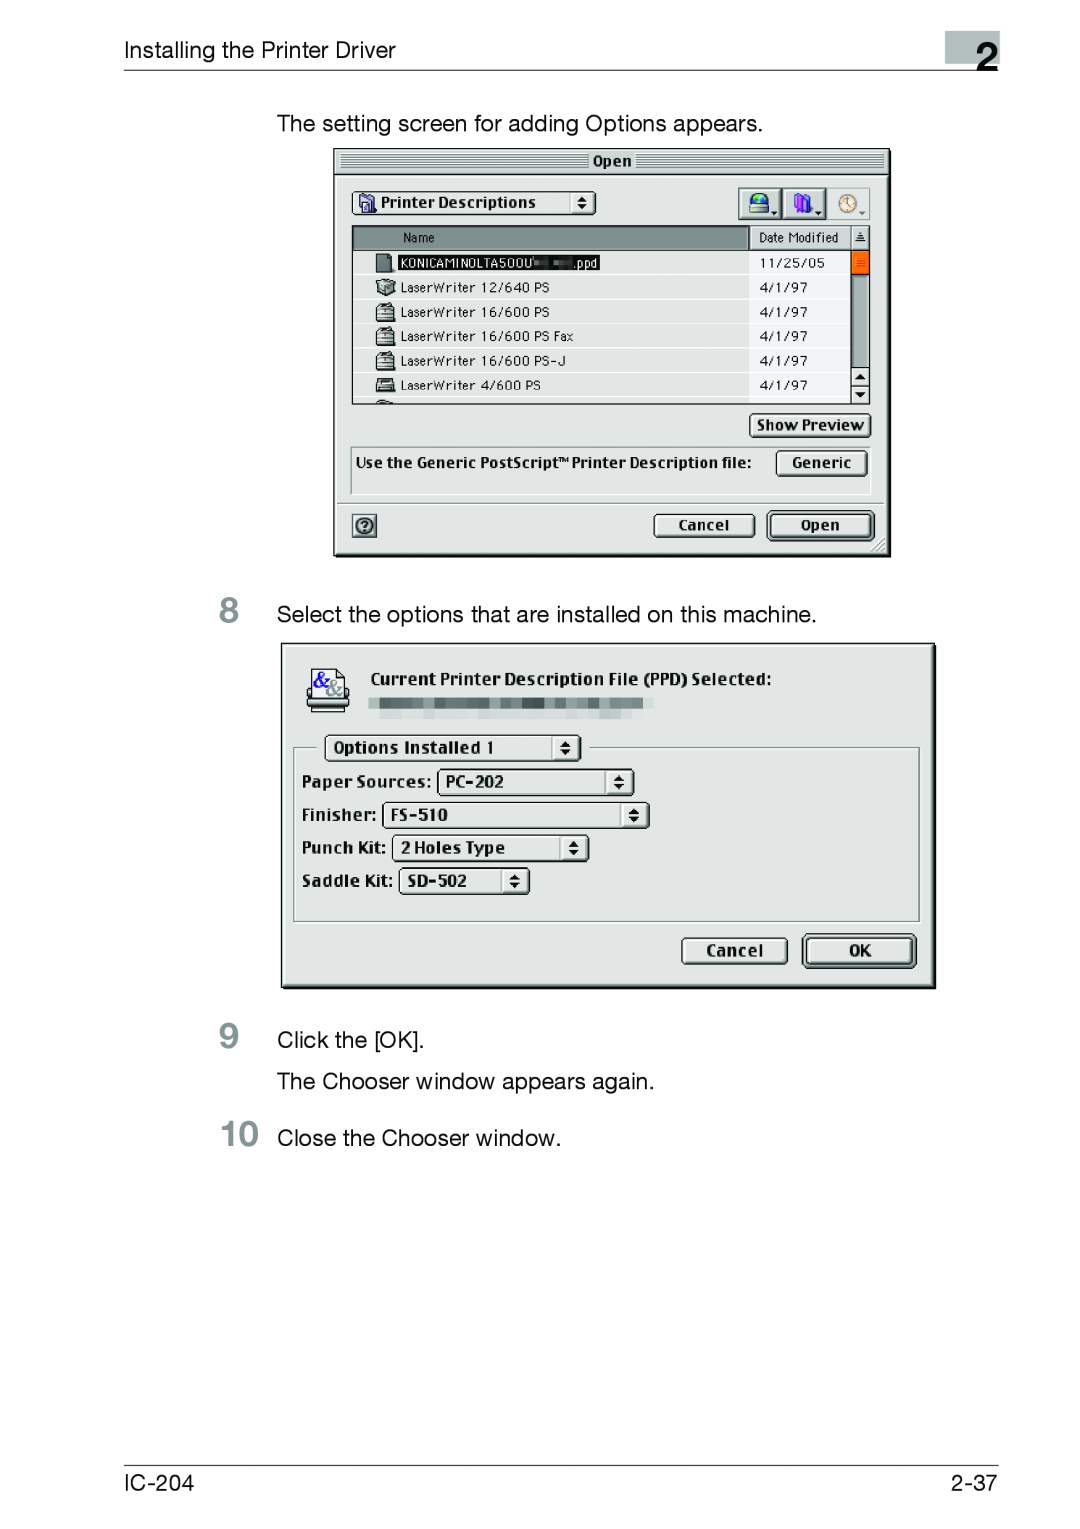 Konica Minolta IC-204 manual Installing the Printer Driver, The setting screen for adding Options appears, 2-37 